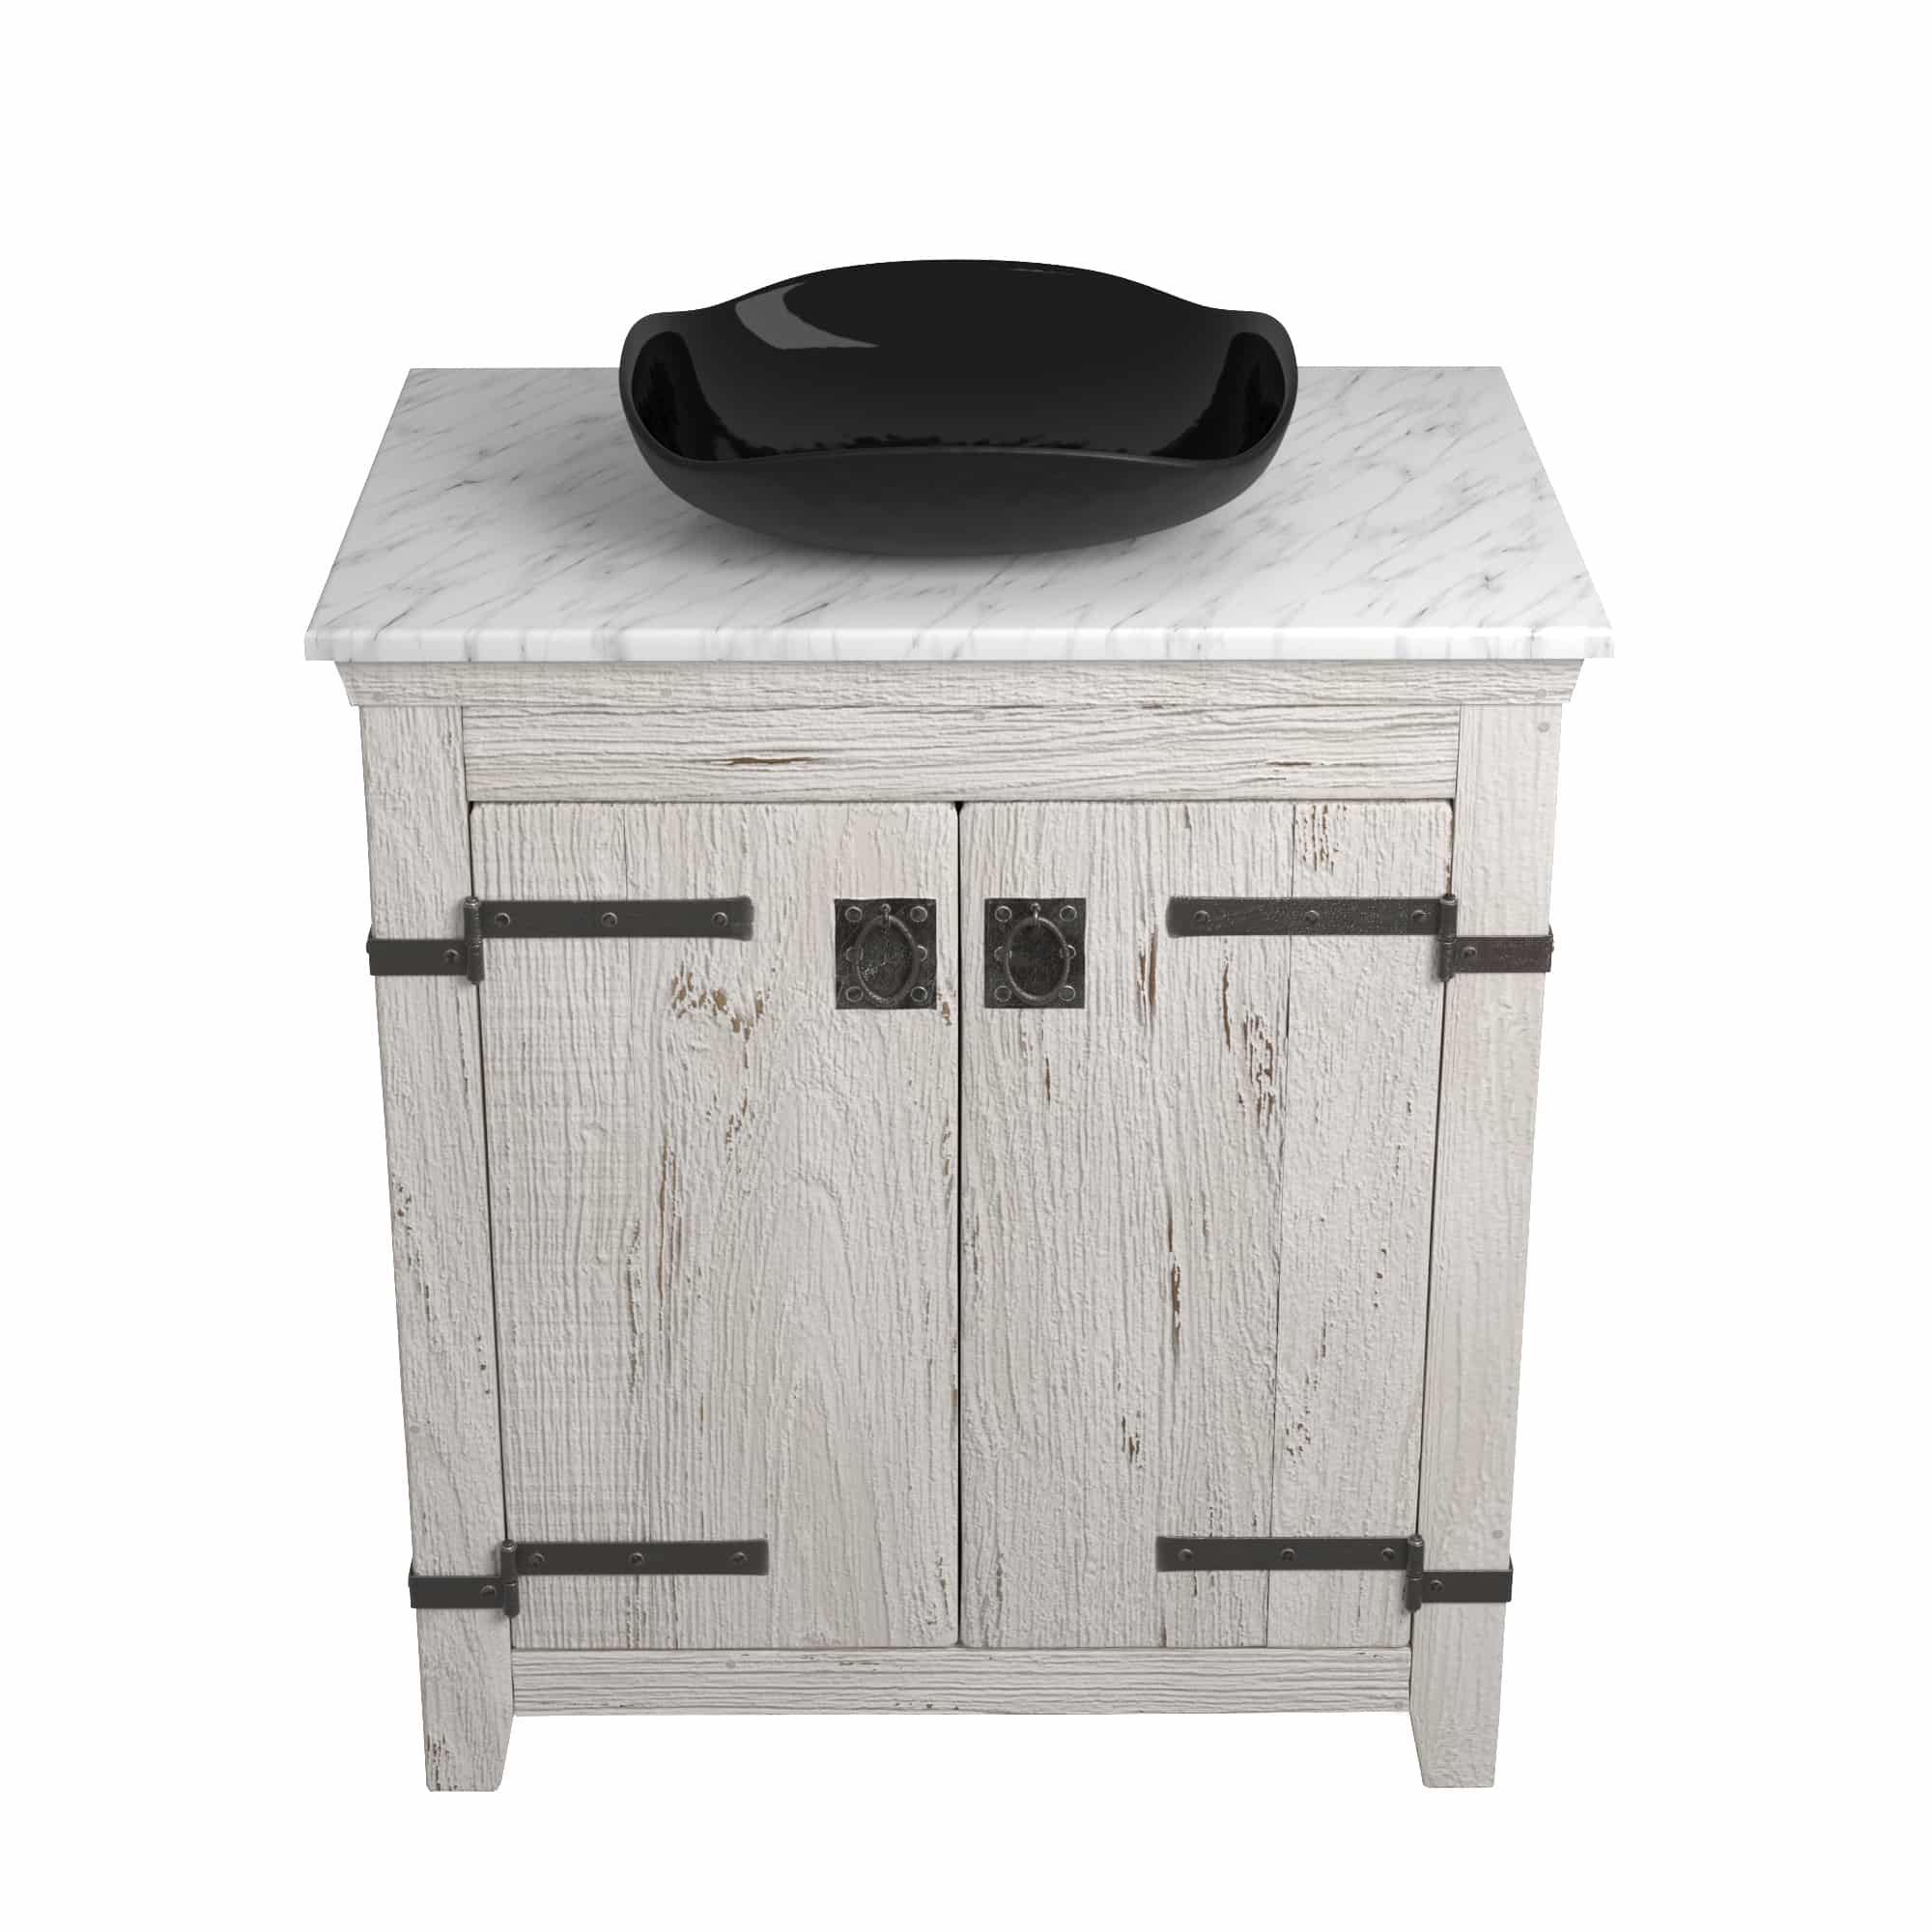 Native Trails 30" Americana Vanity in Whitewash with Carrara Marble Top and Lido in Abyss, Single Faucet Hole, BND30-VB-CT-MG-009